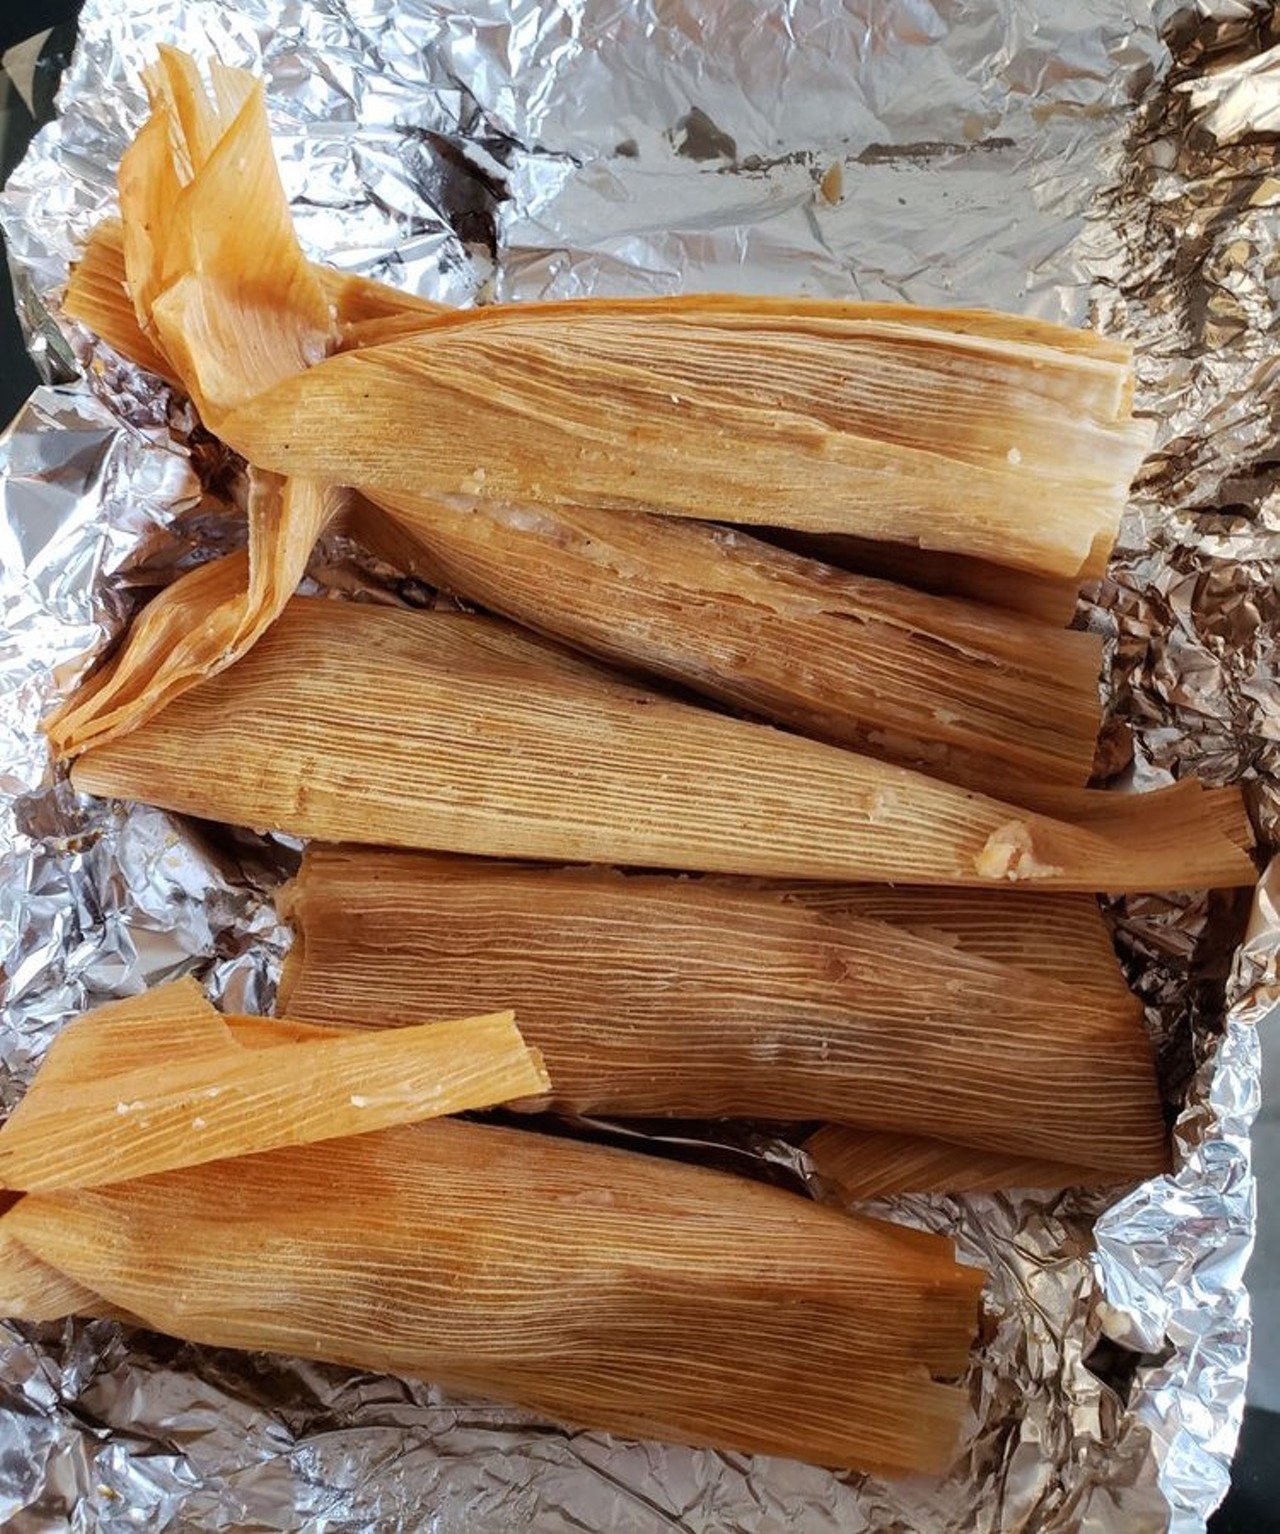 Ruben’s Homemade Tamales
1807 Rigsby Ave, (210) 337-0025, facebook.com
Over on Rigsby you’ll find some of SA’s favorite tamales at Ruben’s, where the lines may be long this time of year, but that’s only because it’s just that tasty. Choose from specialties like bean, chicken and pork with jalapeño.
Photo via Yelp / Dale H.